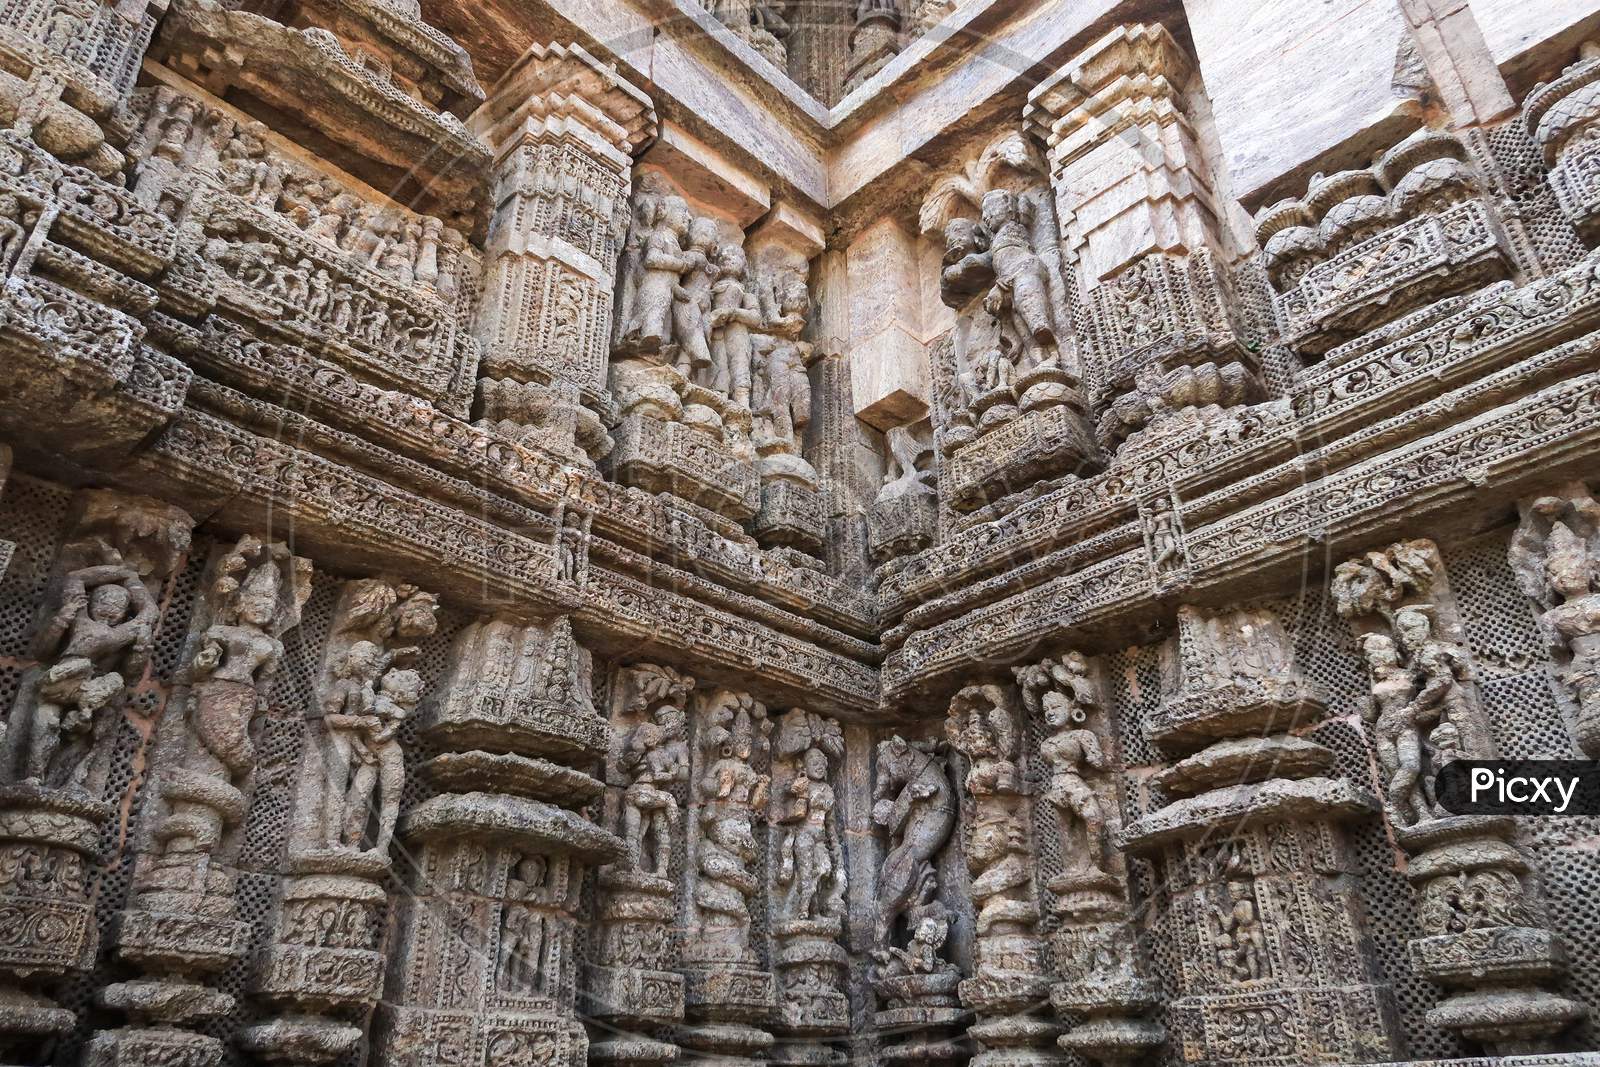 Stone Carvings on the Walls of Sun Temple of Konark